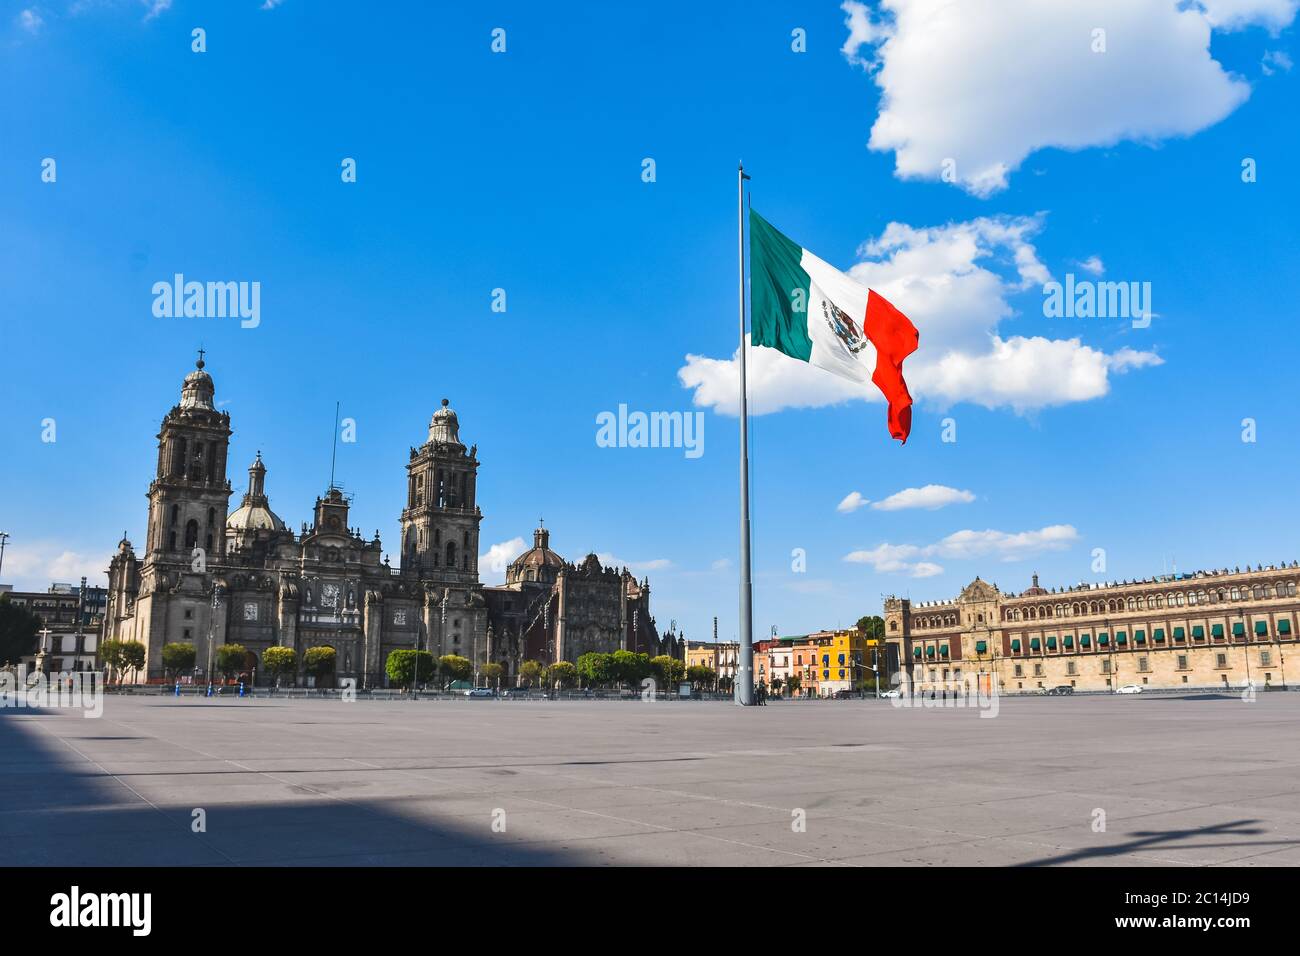 Mexico City, Mexico ; April 26 2020: Zocalo square and metropolitan cathedral in the historic center of Mexico City closed during Coronavirus outbreak Stock Photo